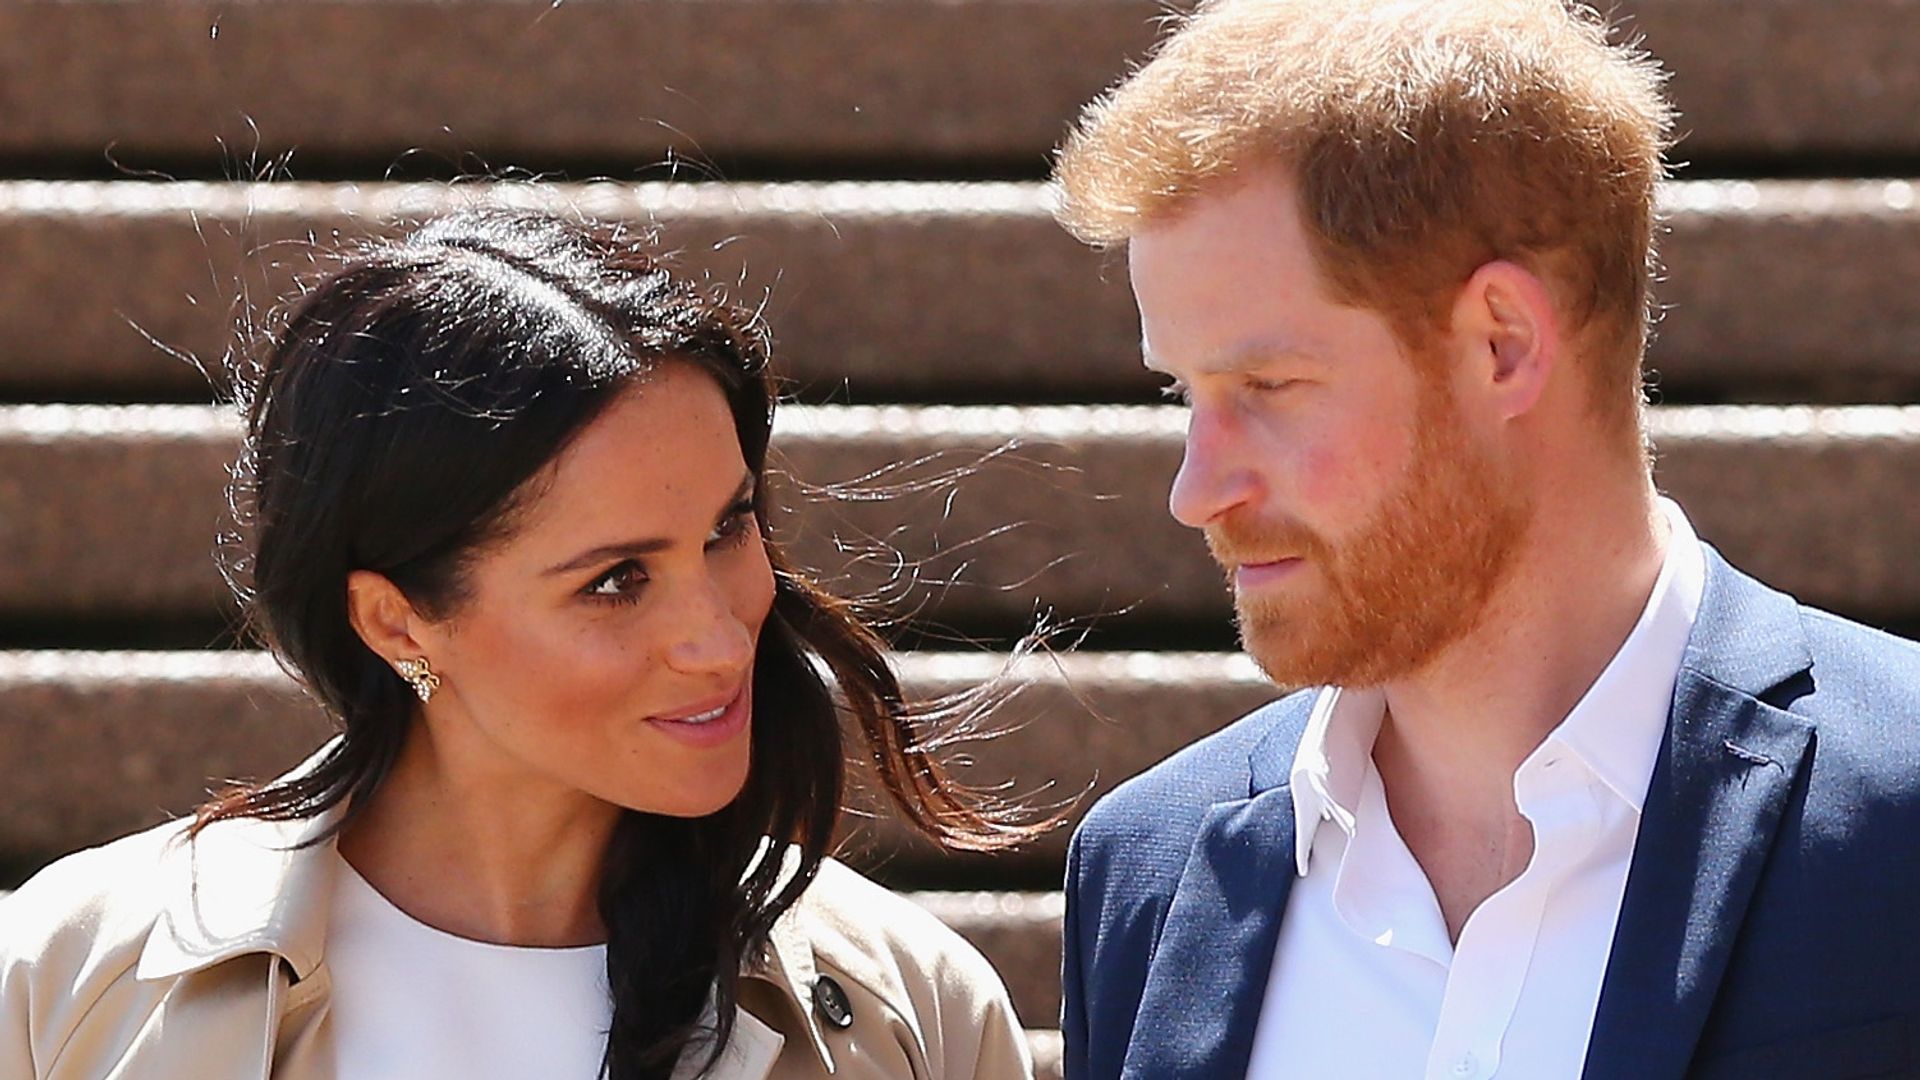 Prince Harry talking to Meghan Markle at the Sydney Opera House